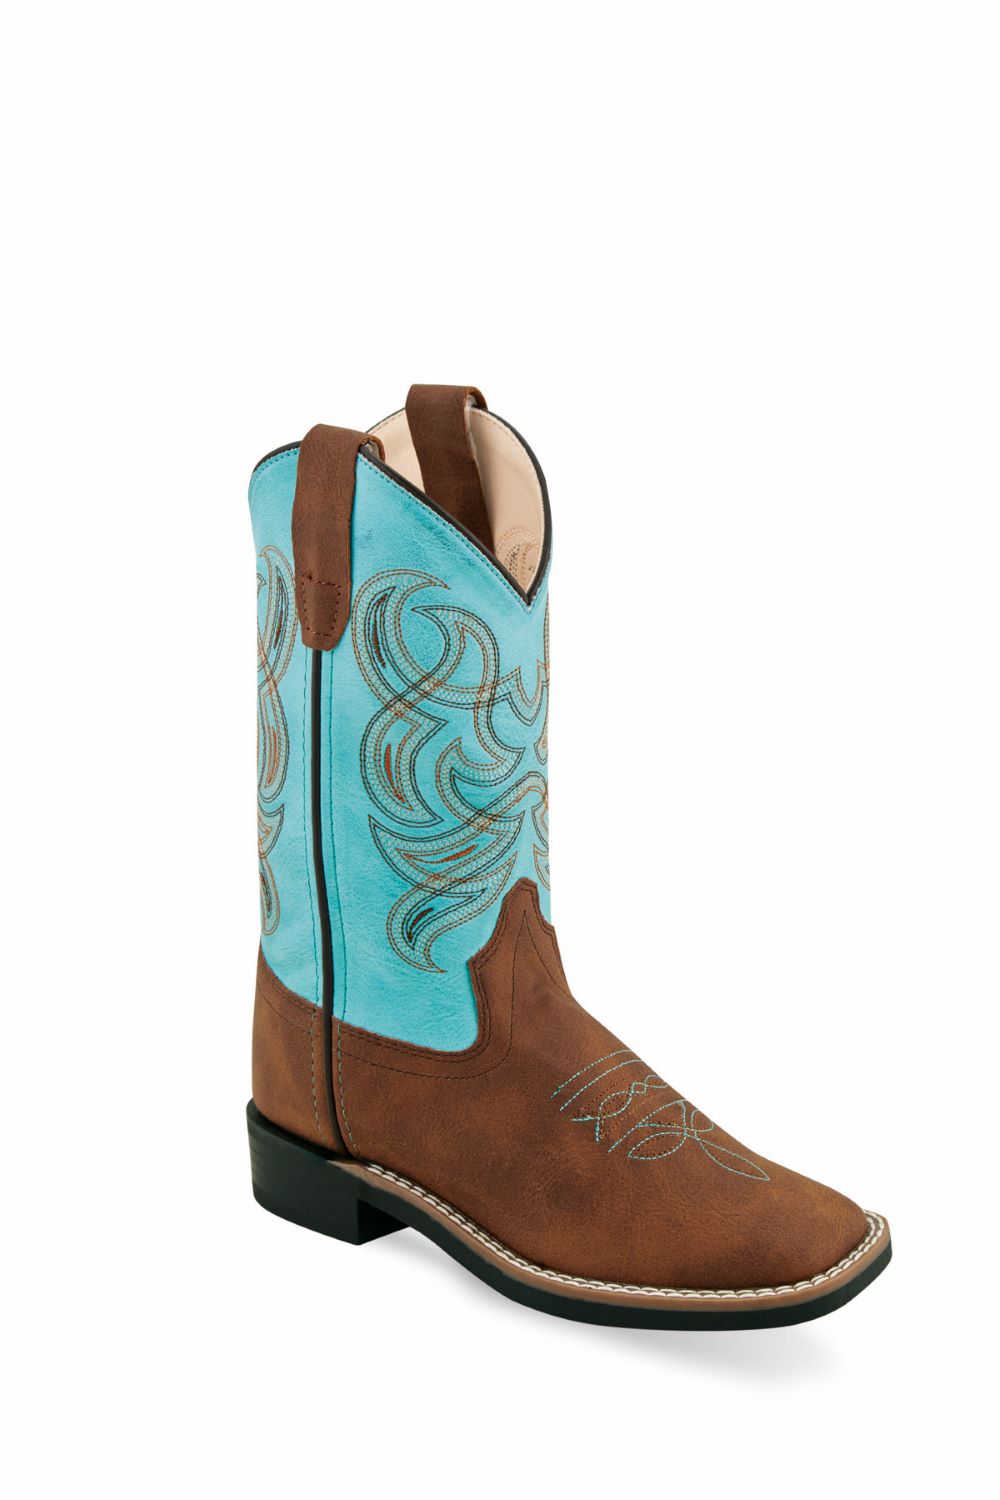 'Old West' Children's Broad Square Toe - Brown / Turquoise